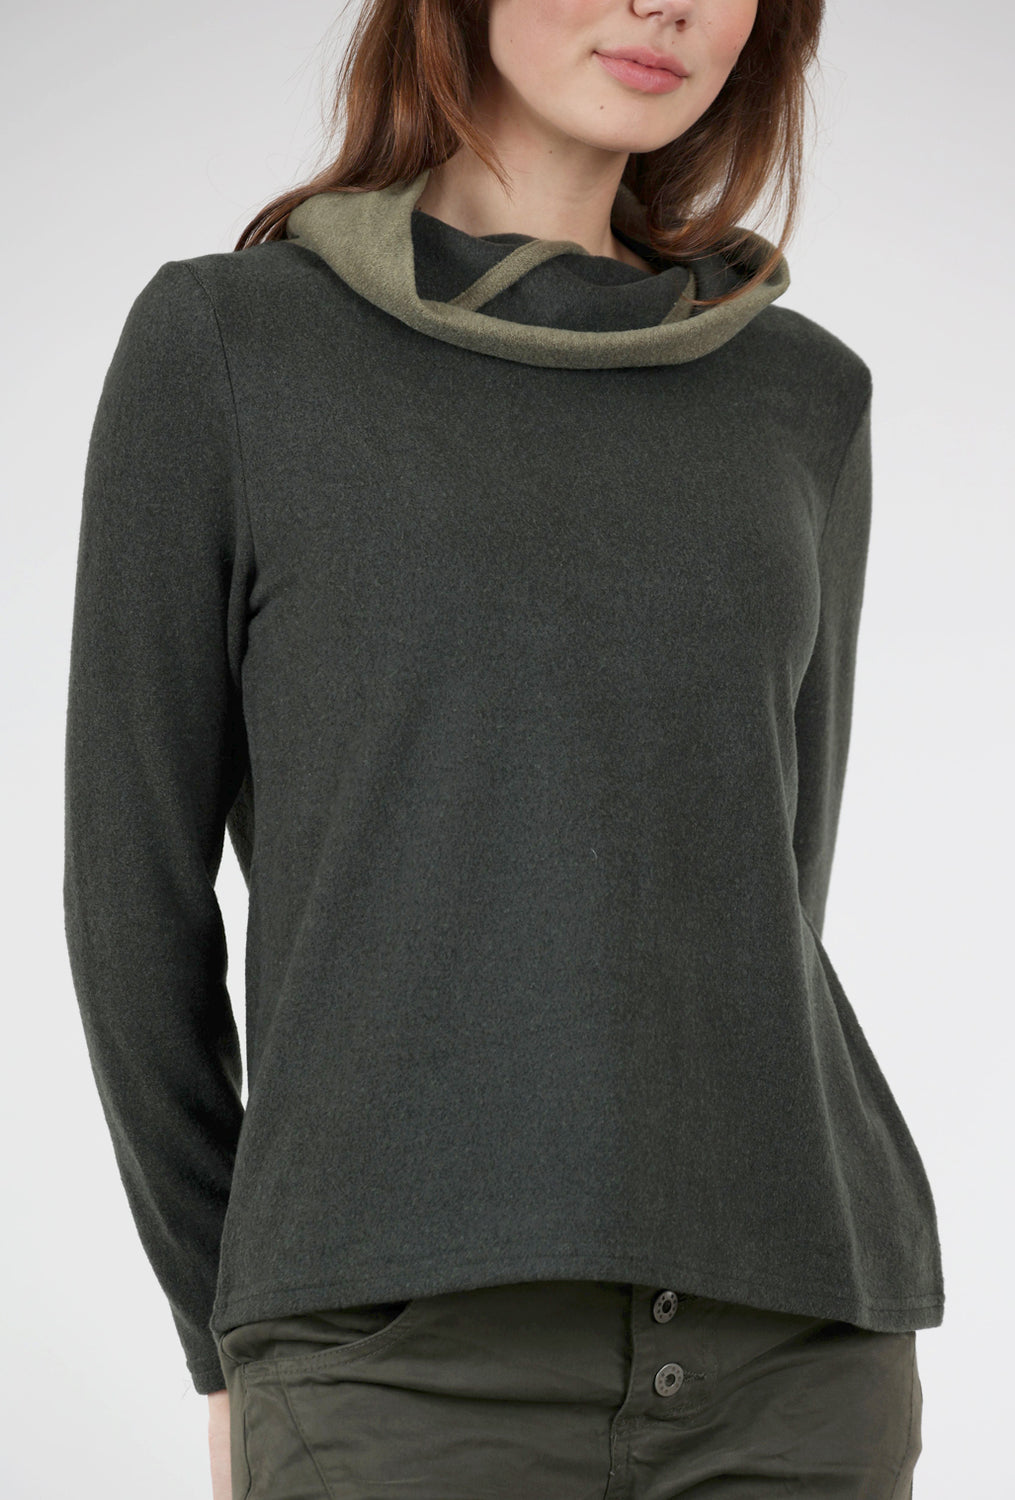 Contrast Cowl Cozy Top, Olive